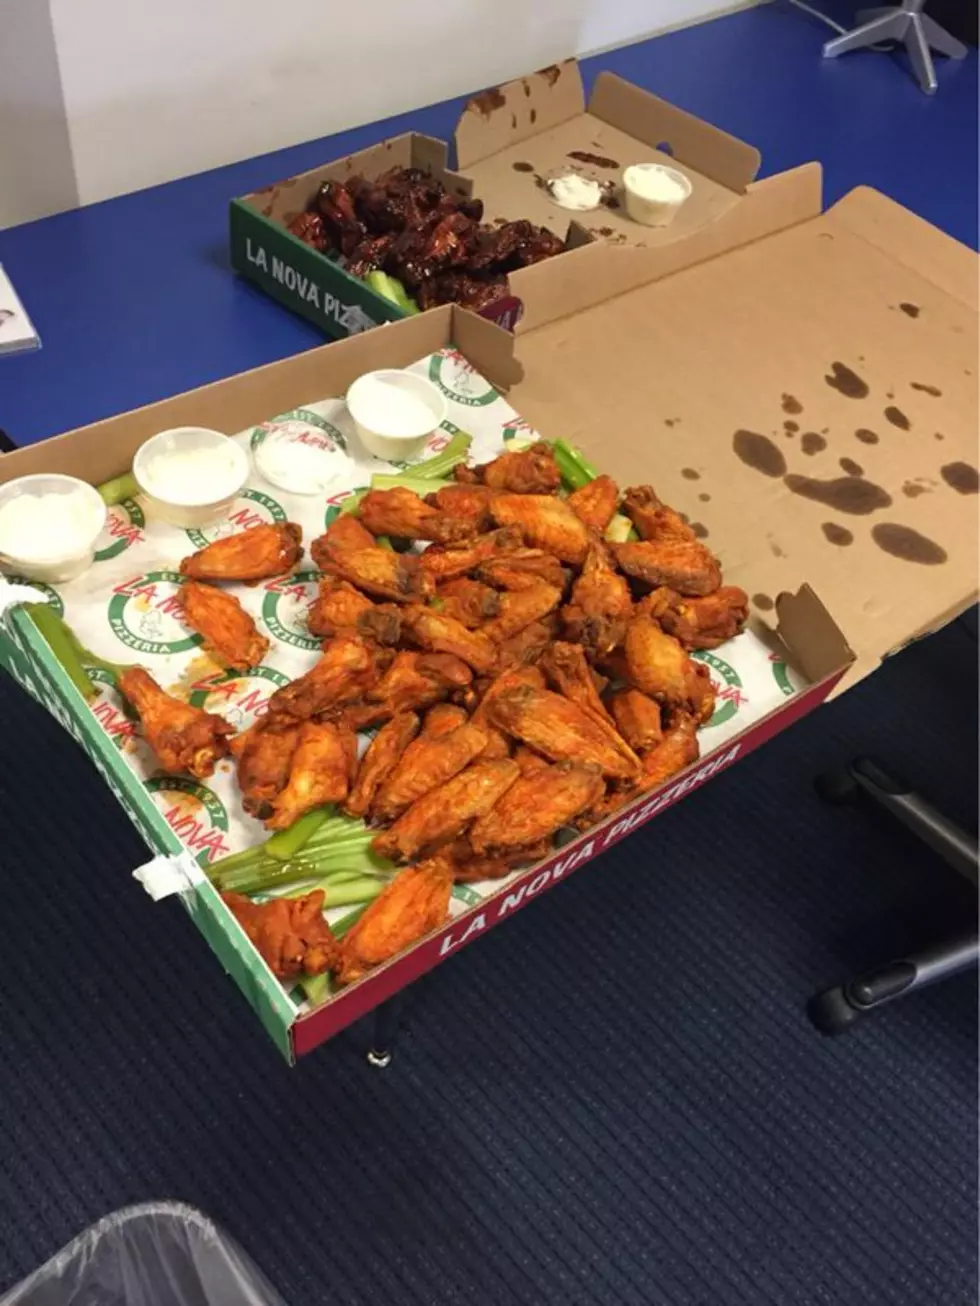 Best Wings in the State of New York – Do You Agree?